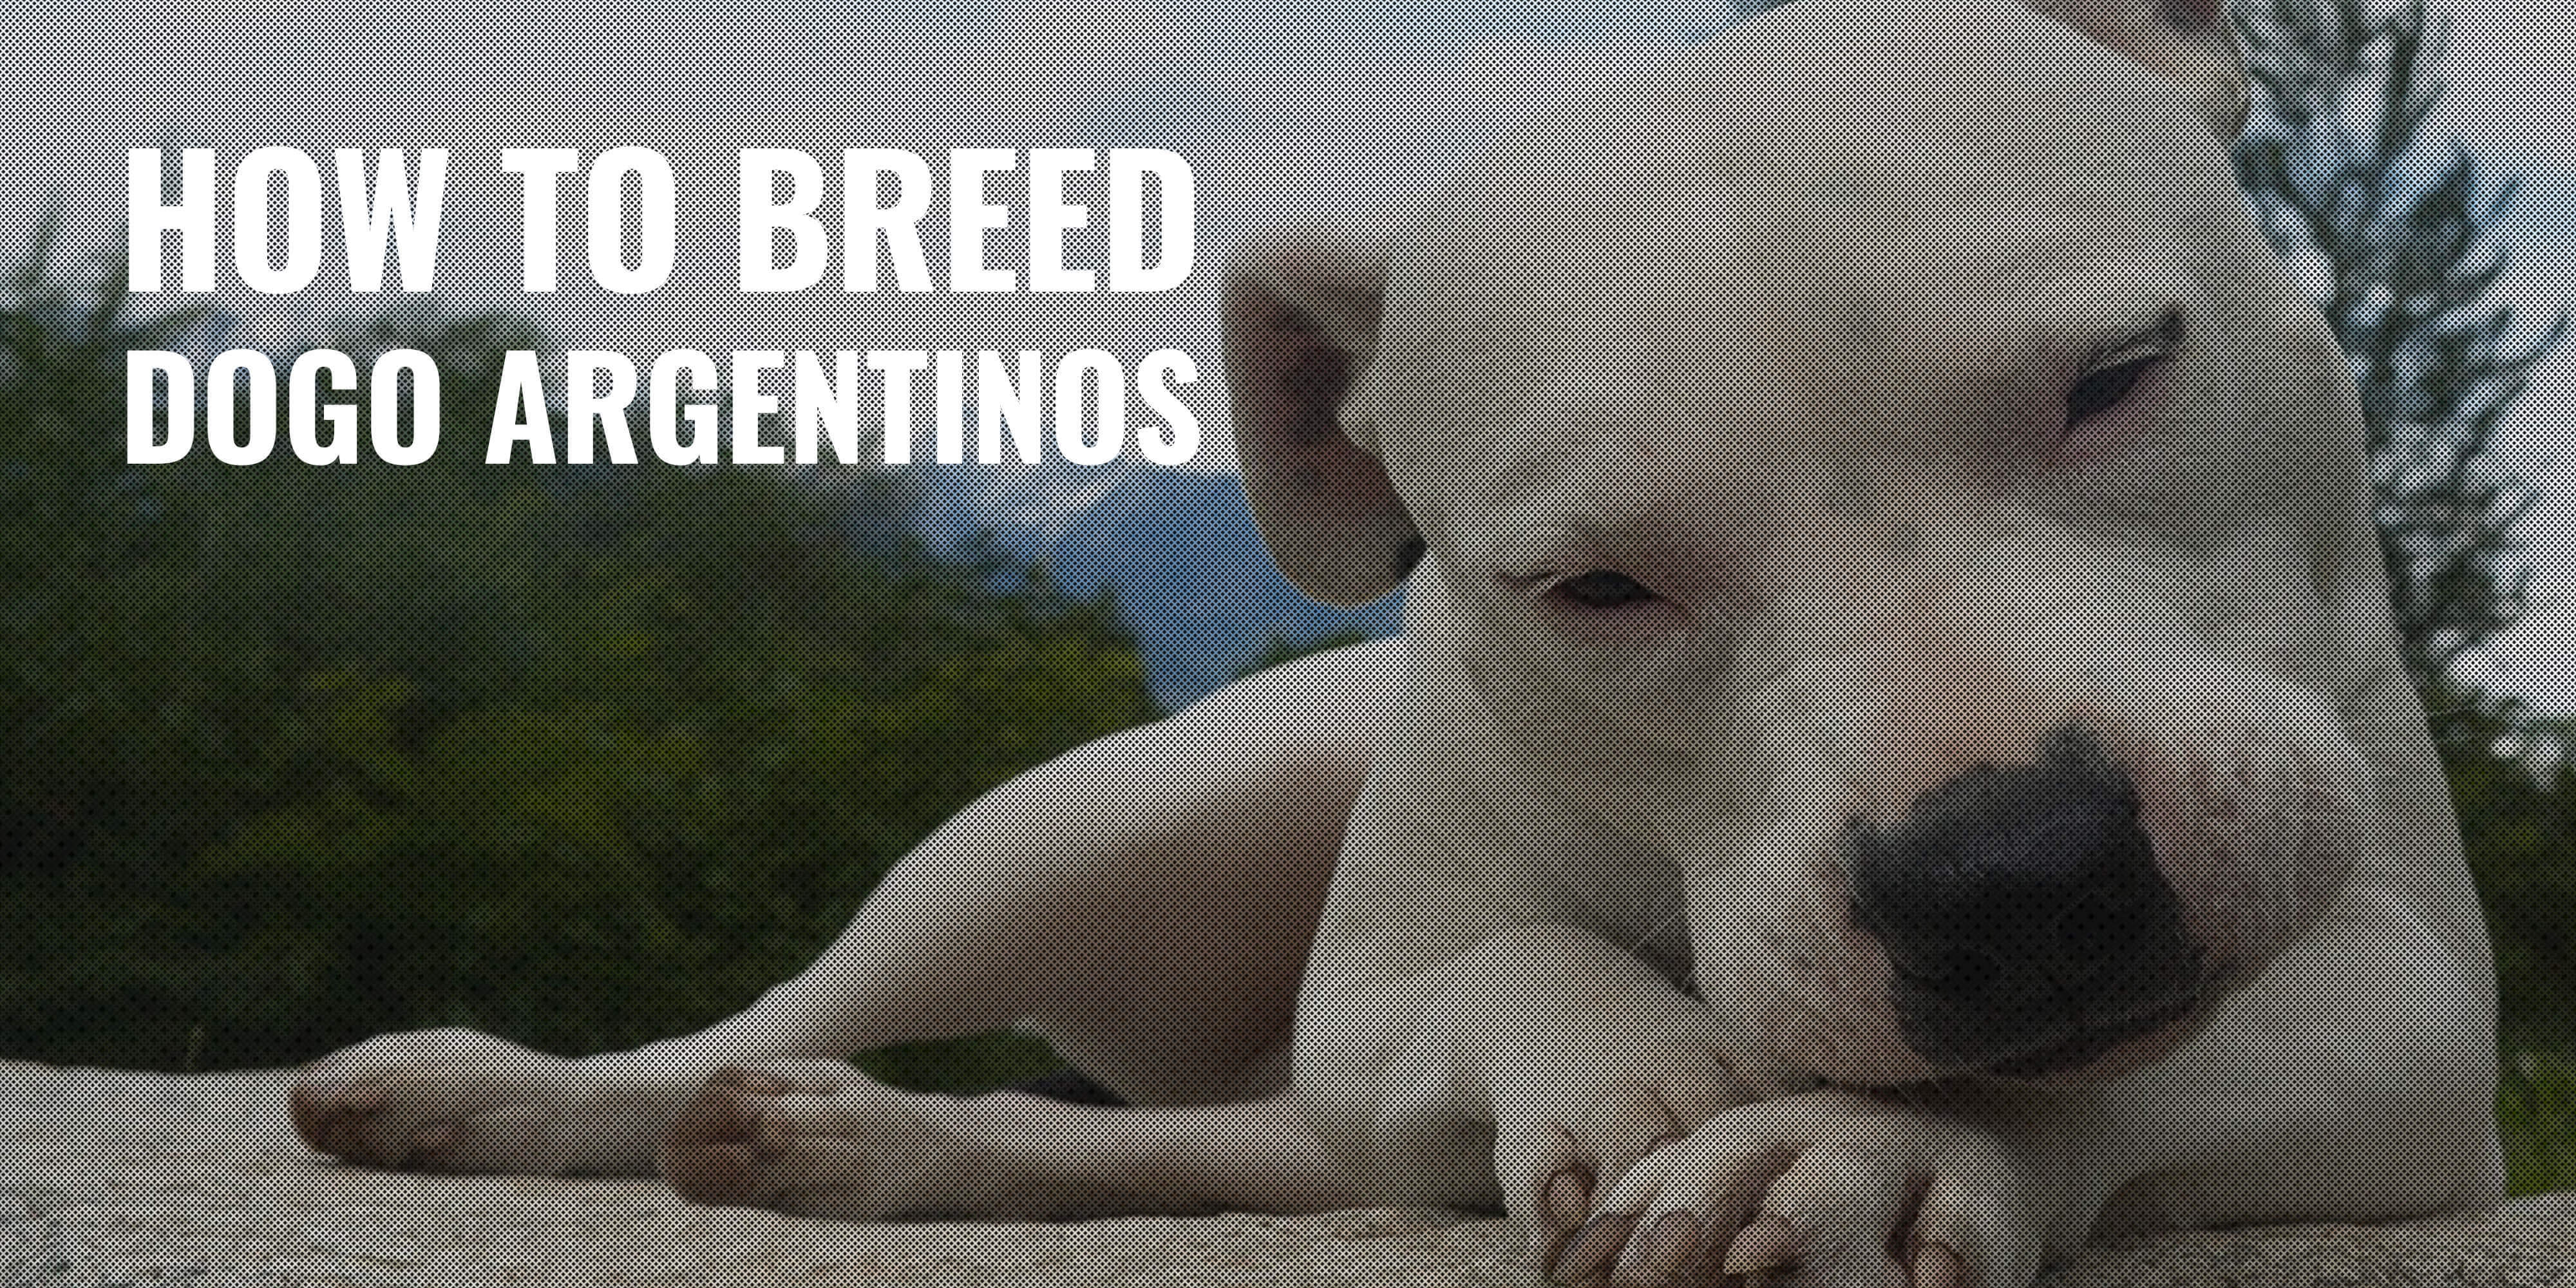 how to breed dogo argentinos